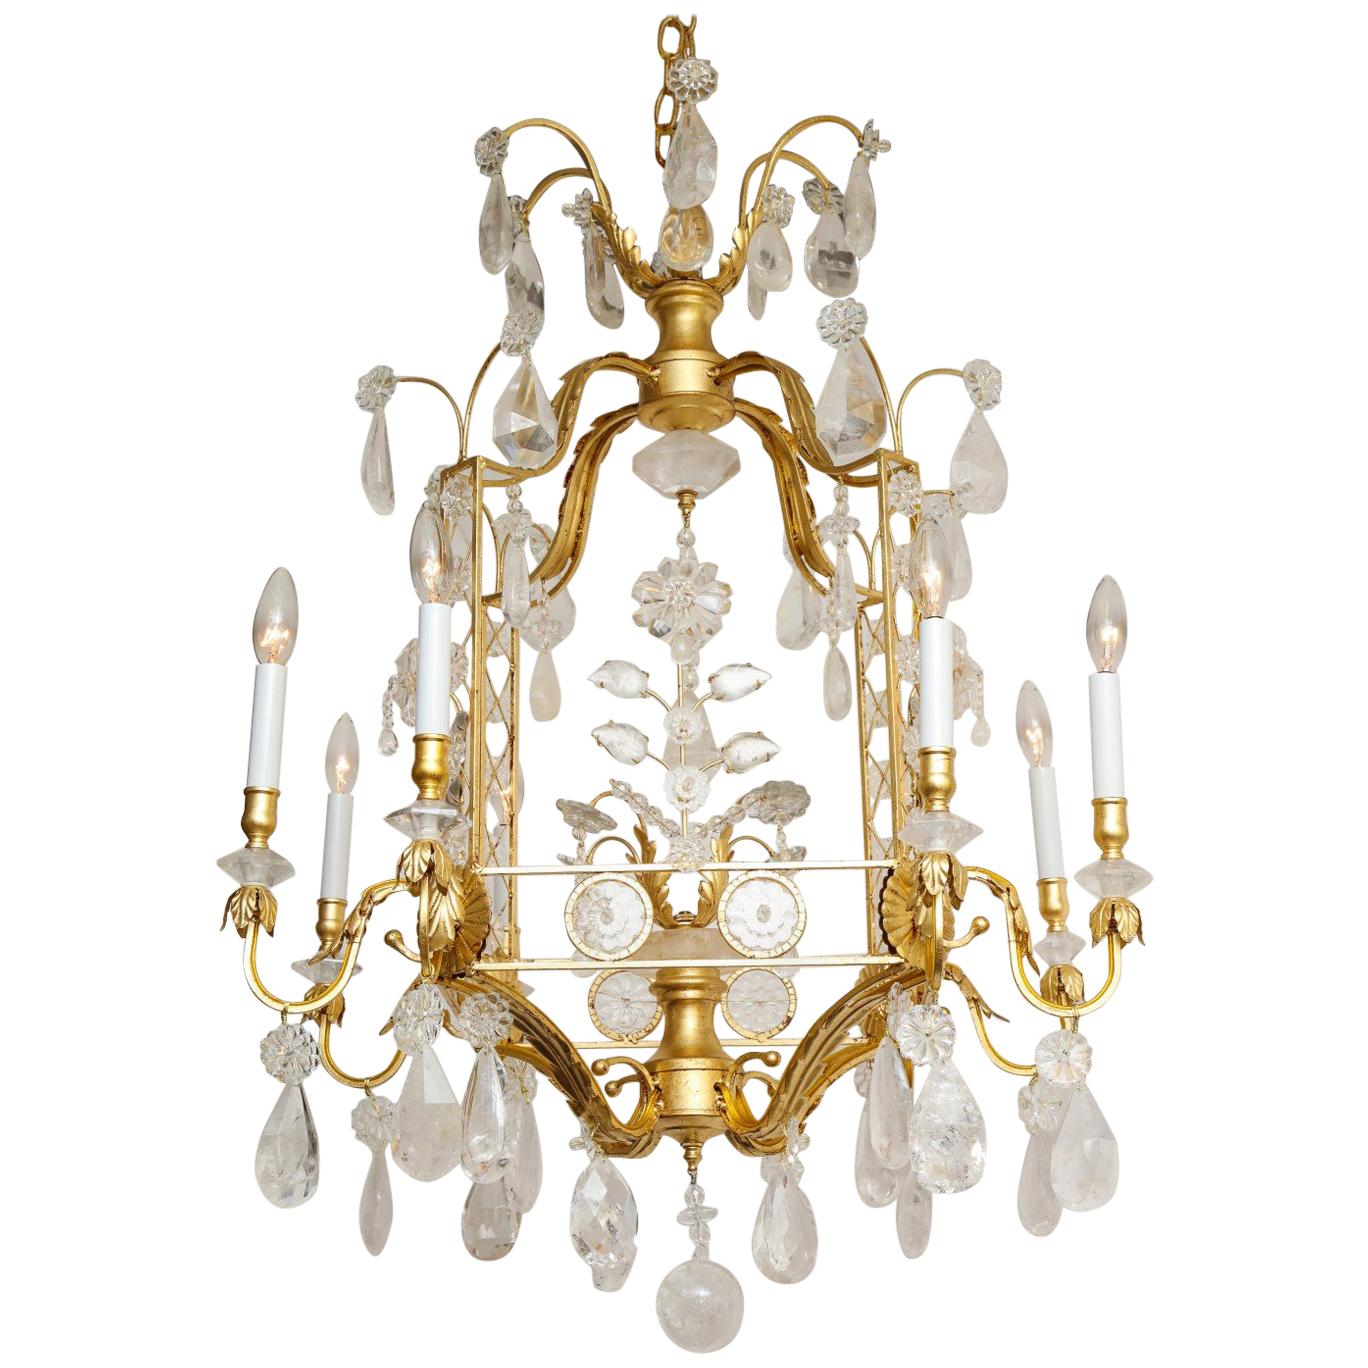 Louis XVI Style Rock Crystal Chandelier, Gold Gilt Metal Finish, New